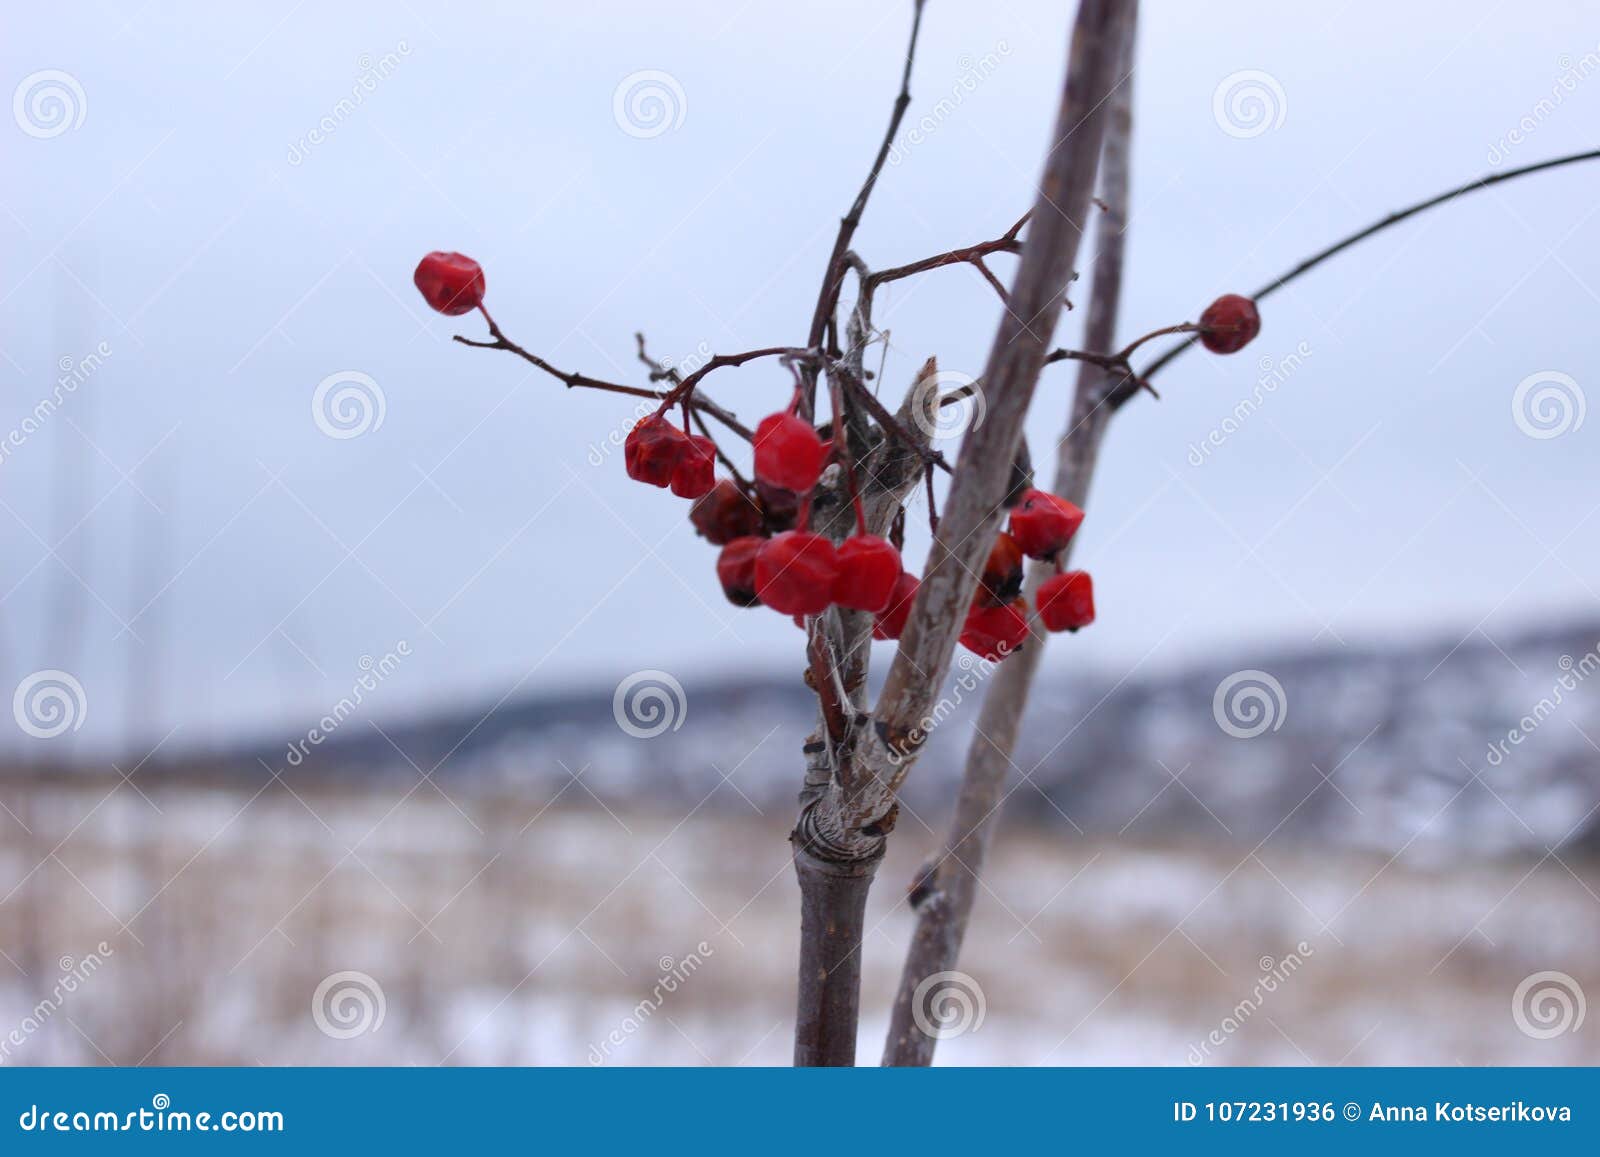 Frozen berries on a tree stock photo. Image of design - 107231936